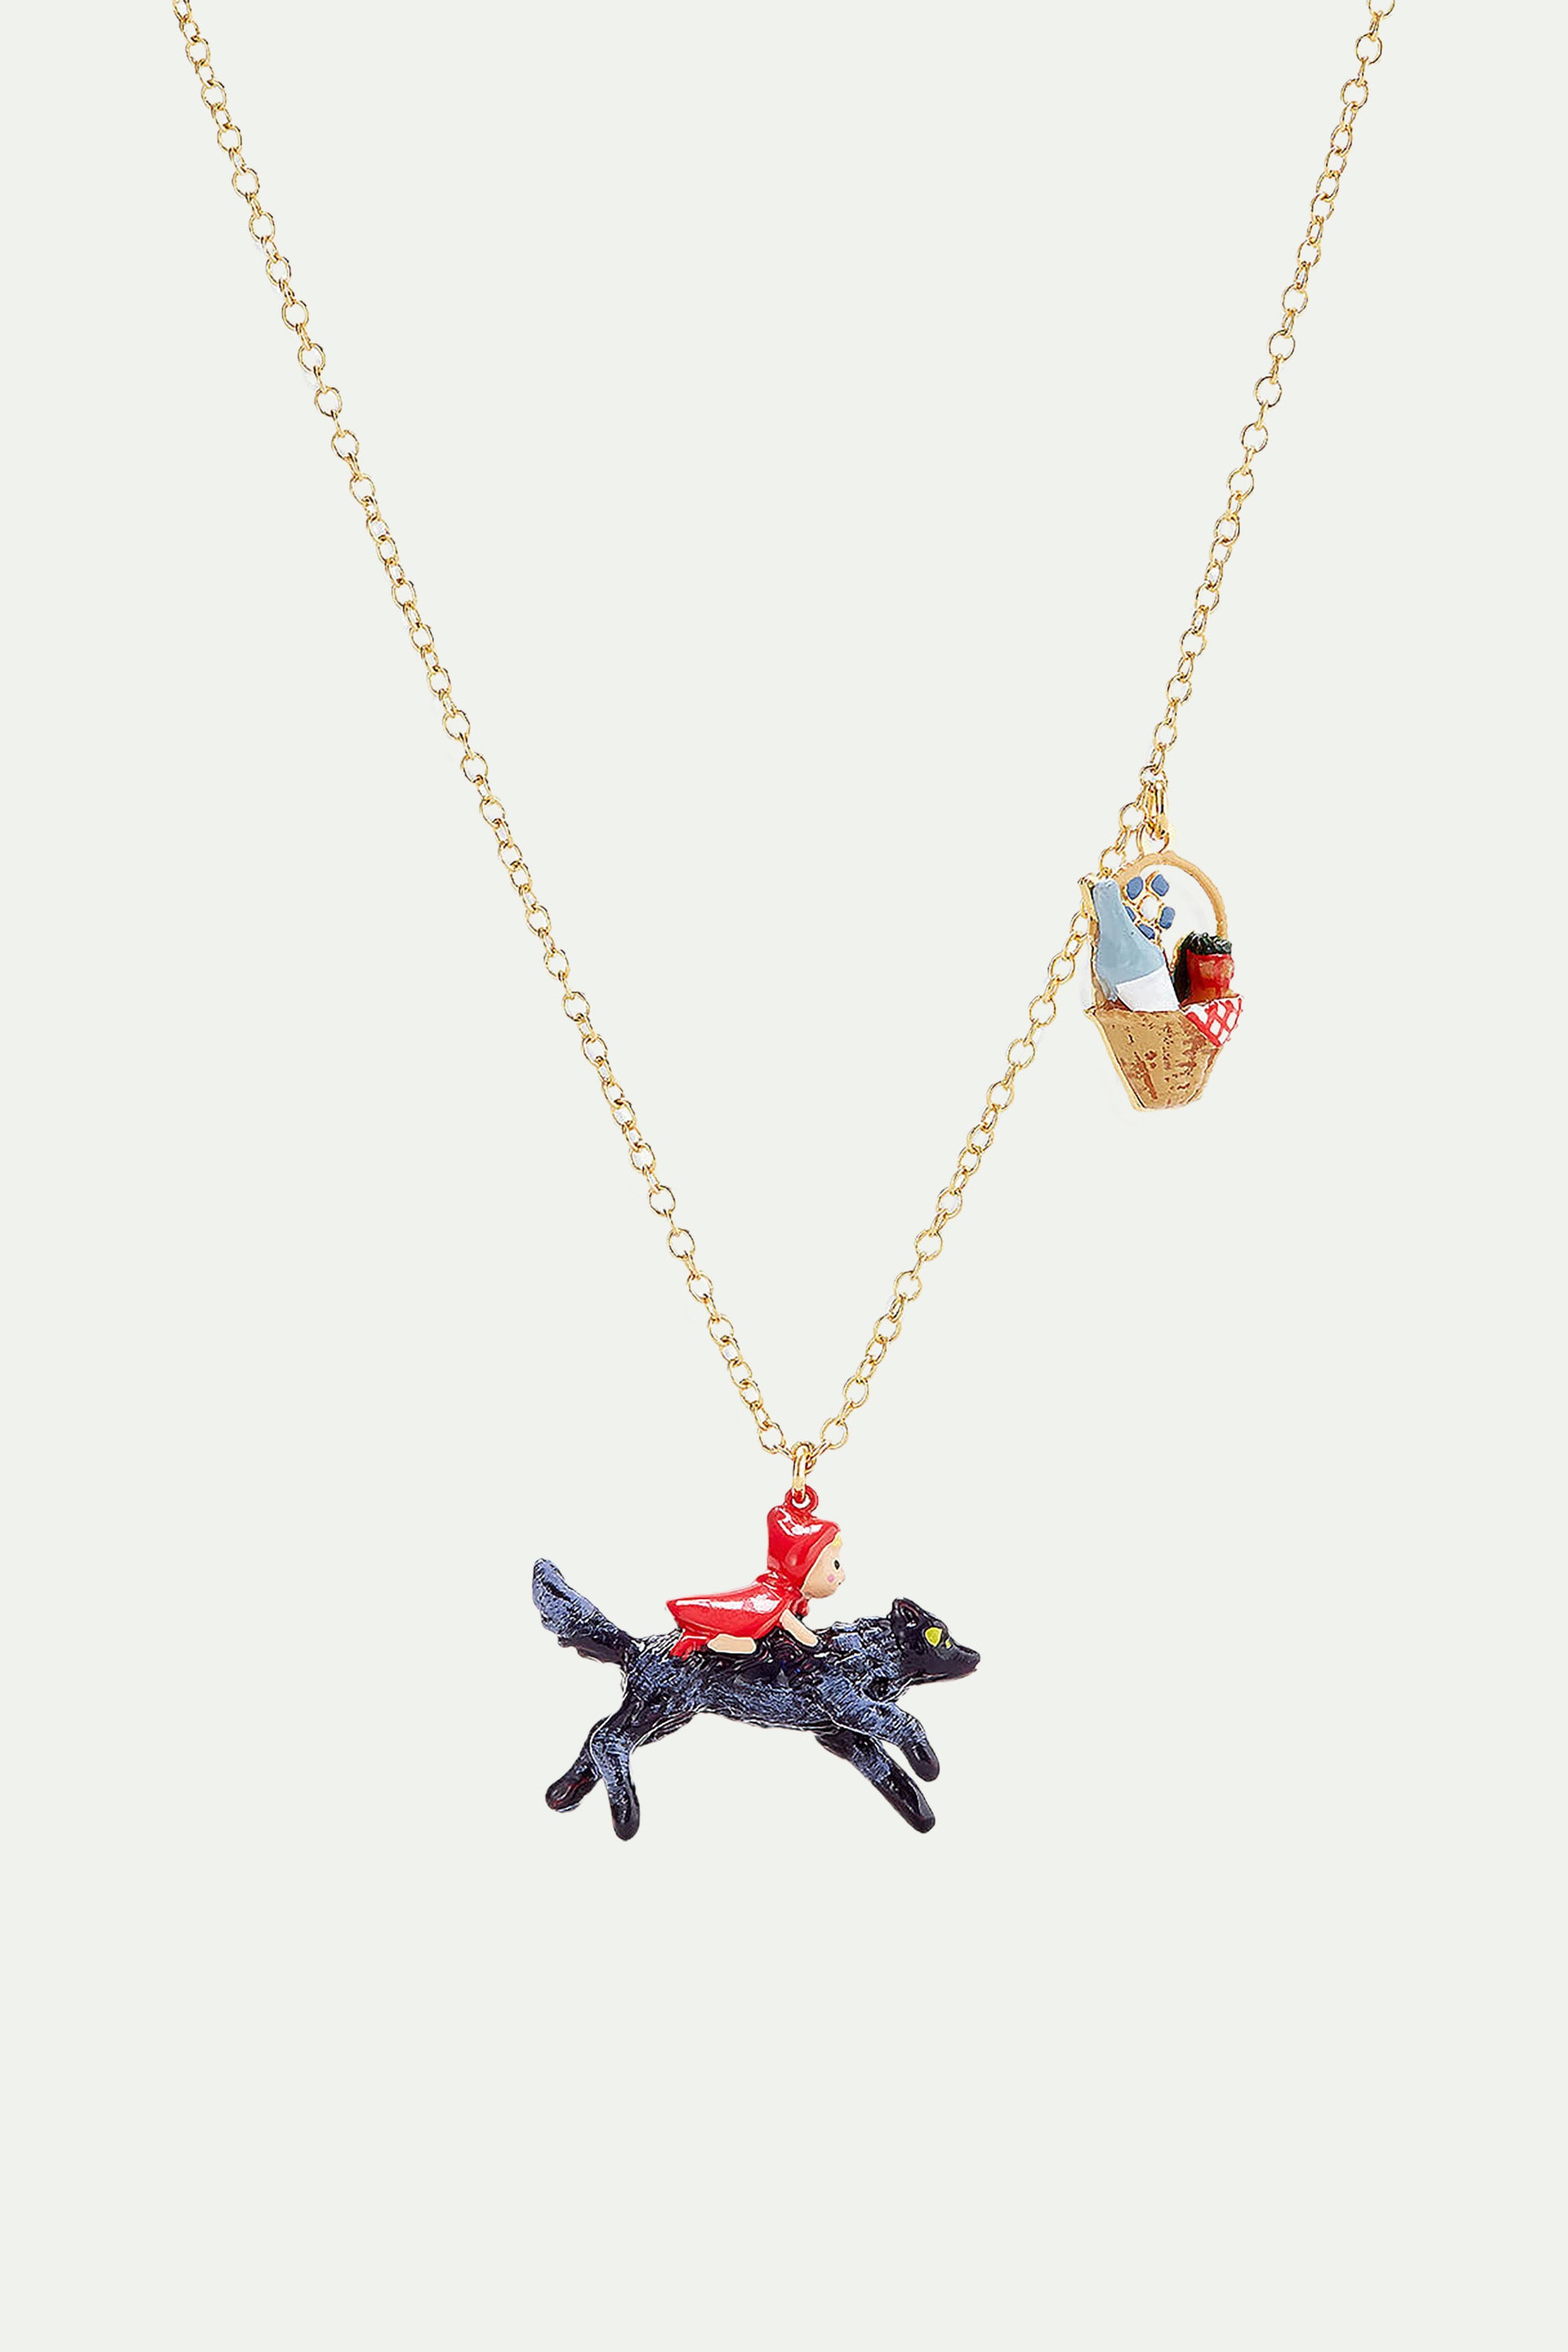 Little Red Riding Hood on Big Bad Wolf pendant necklace